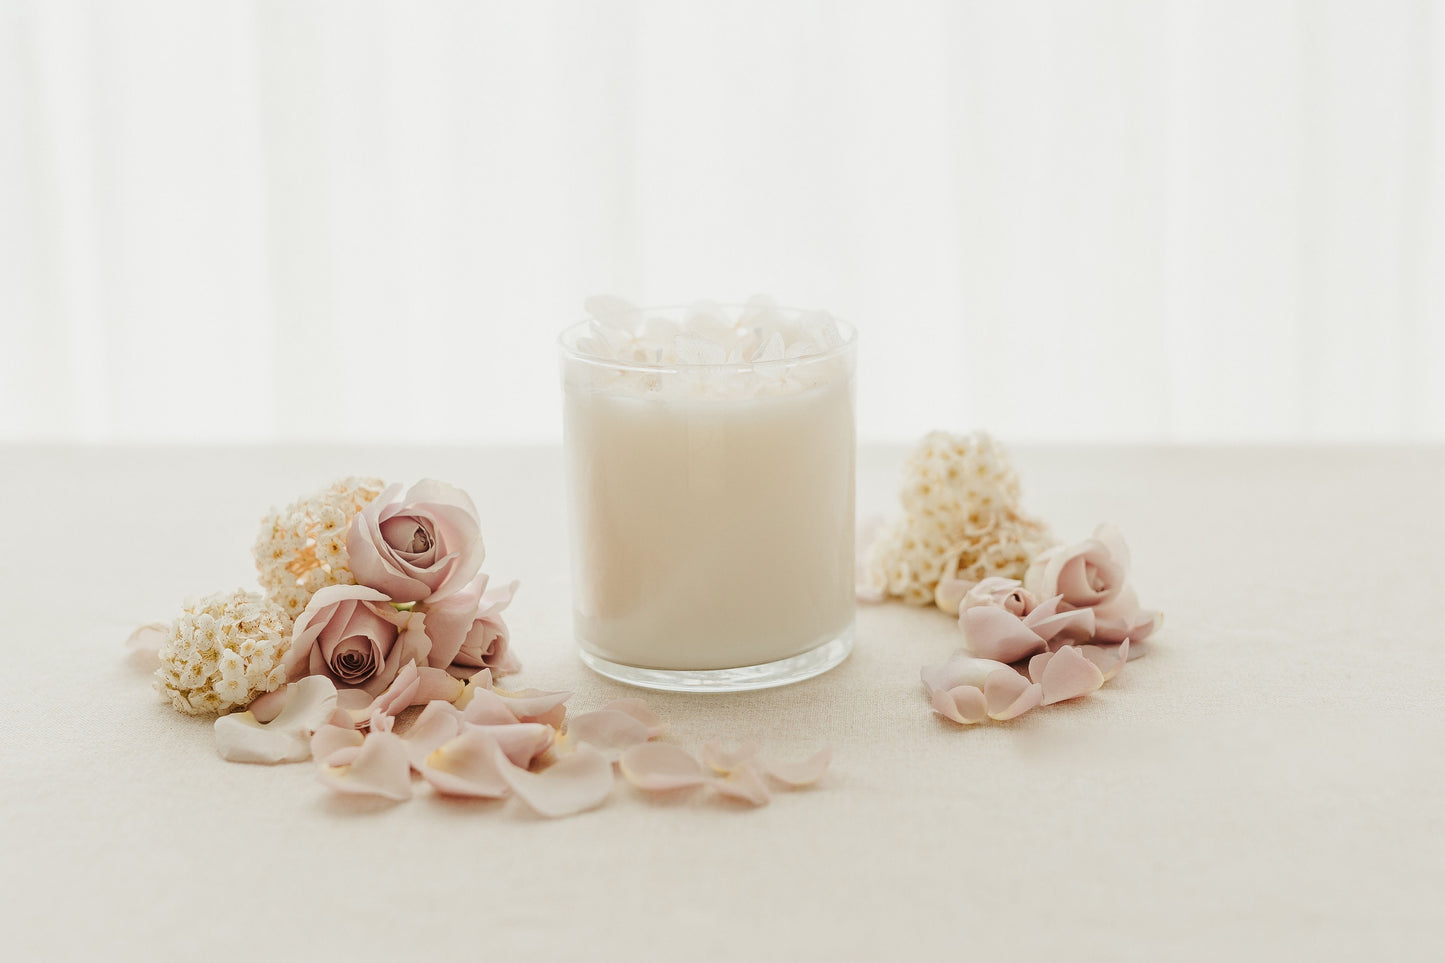 White Hydrangea Candle in Pink Peony